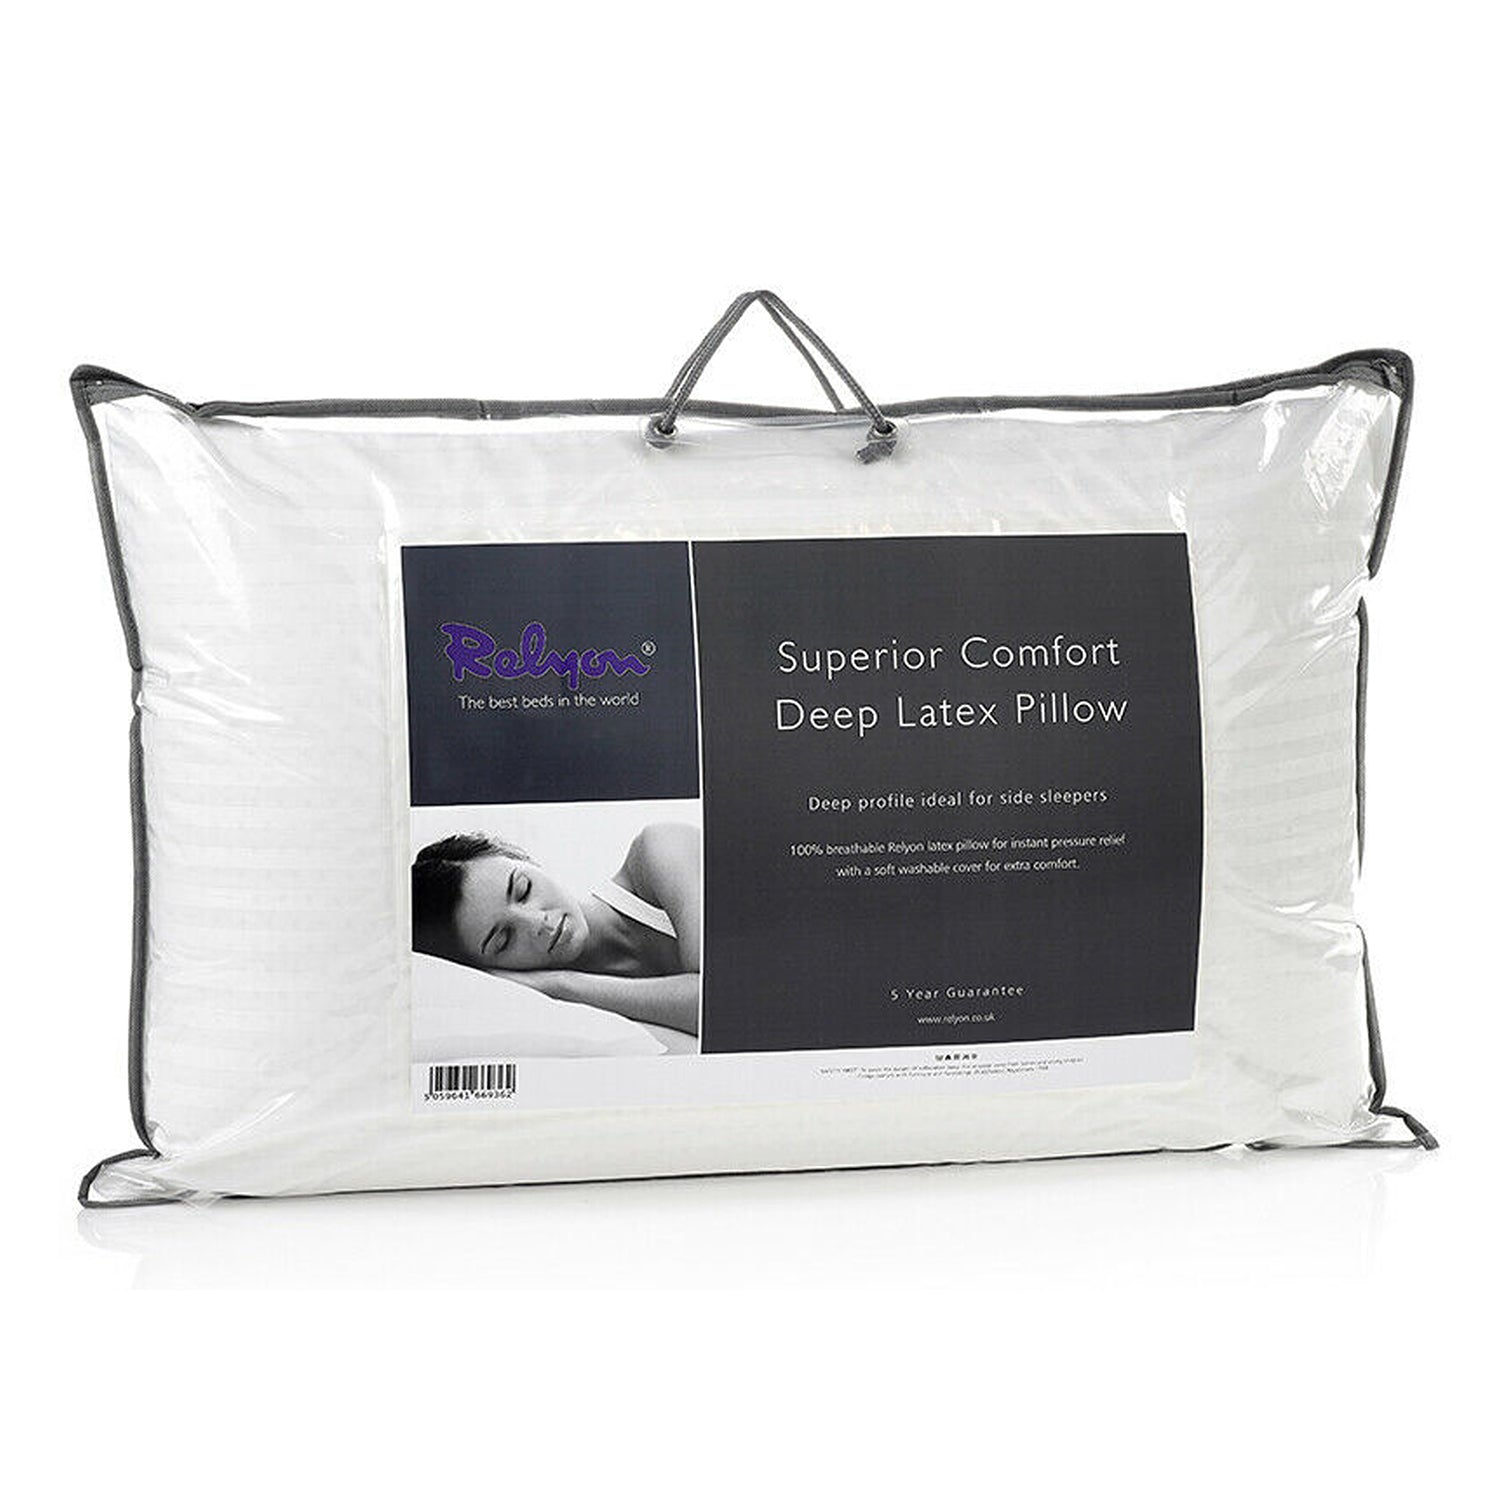 Relyon Relyon Superior Comfort Deep Latex Pillow 1 Shaws Department Stores